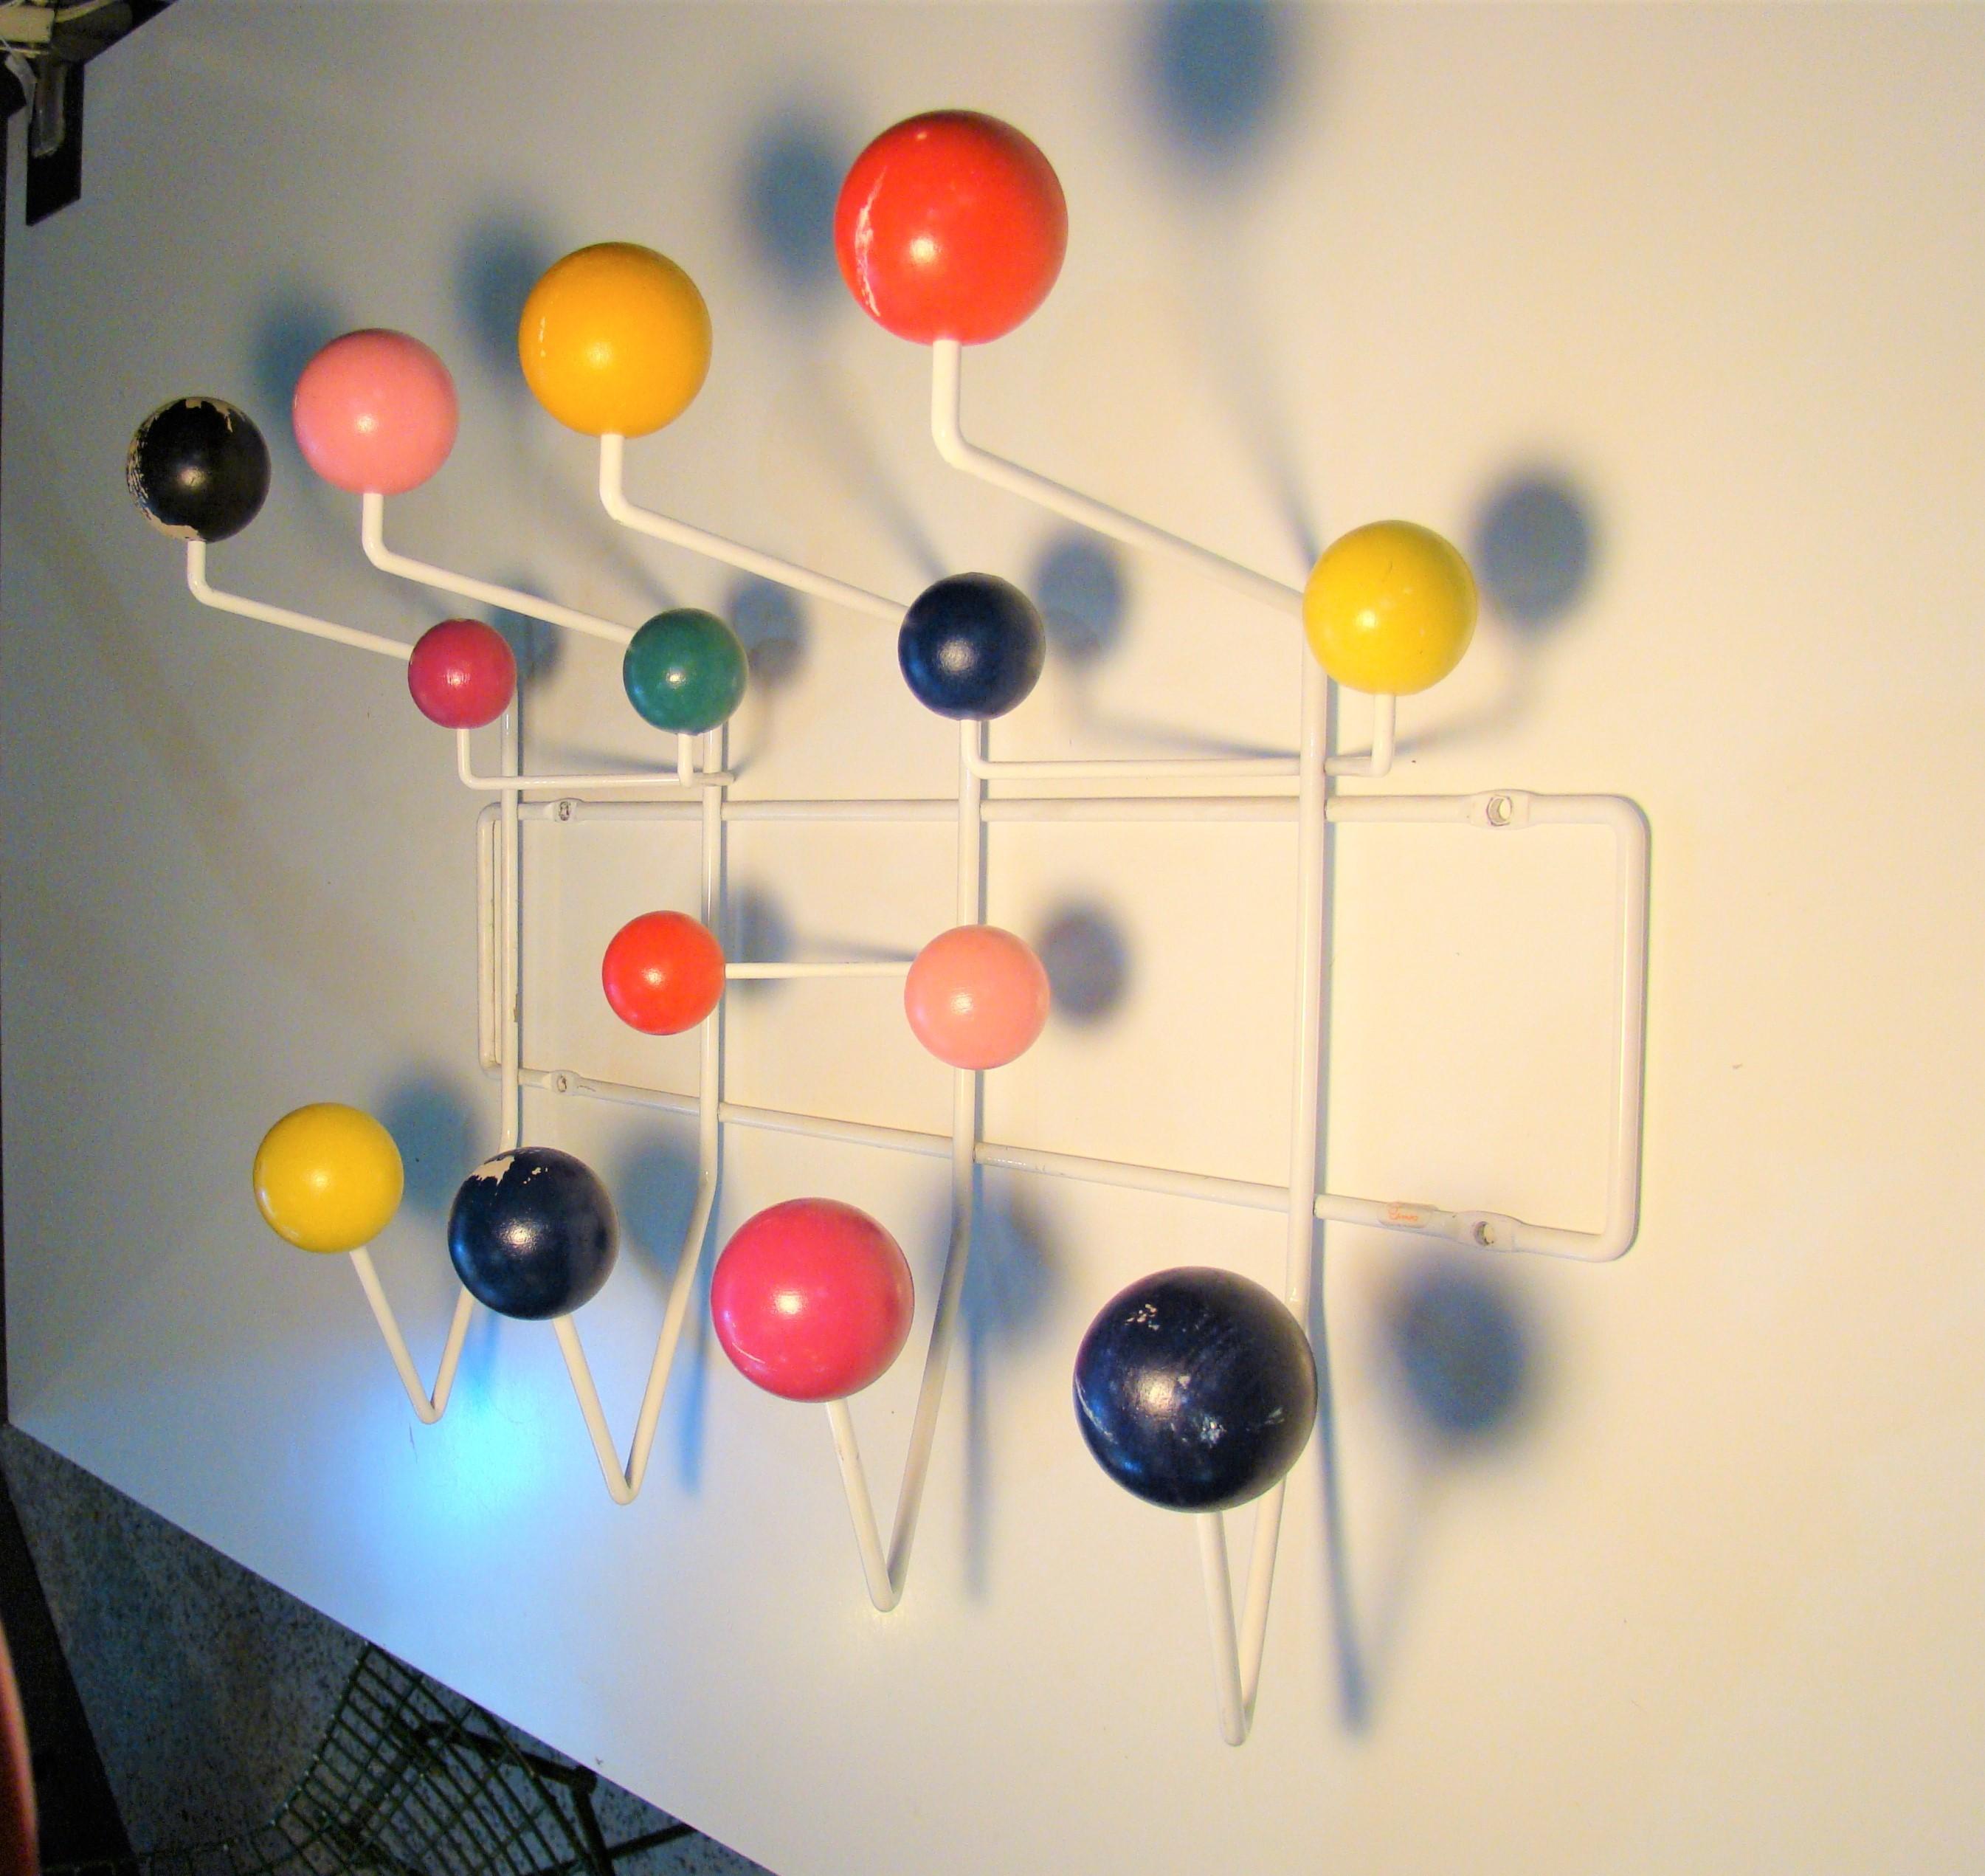 Vintage Eames Hang-It-All multicolored coat rack by Charles & Ray Eames for Herman Miller. Some wear with age as seen in the photos. Perfect addition for any Mid-Century Modern home.